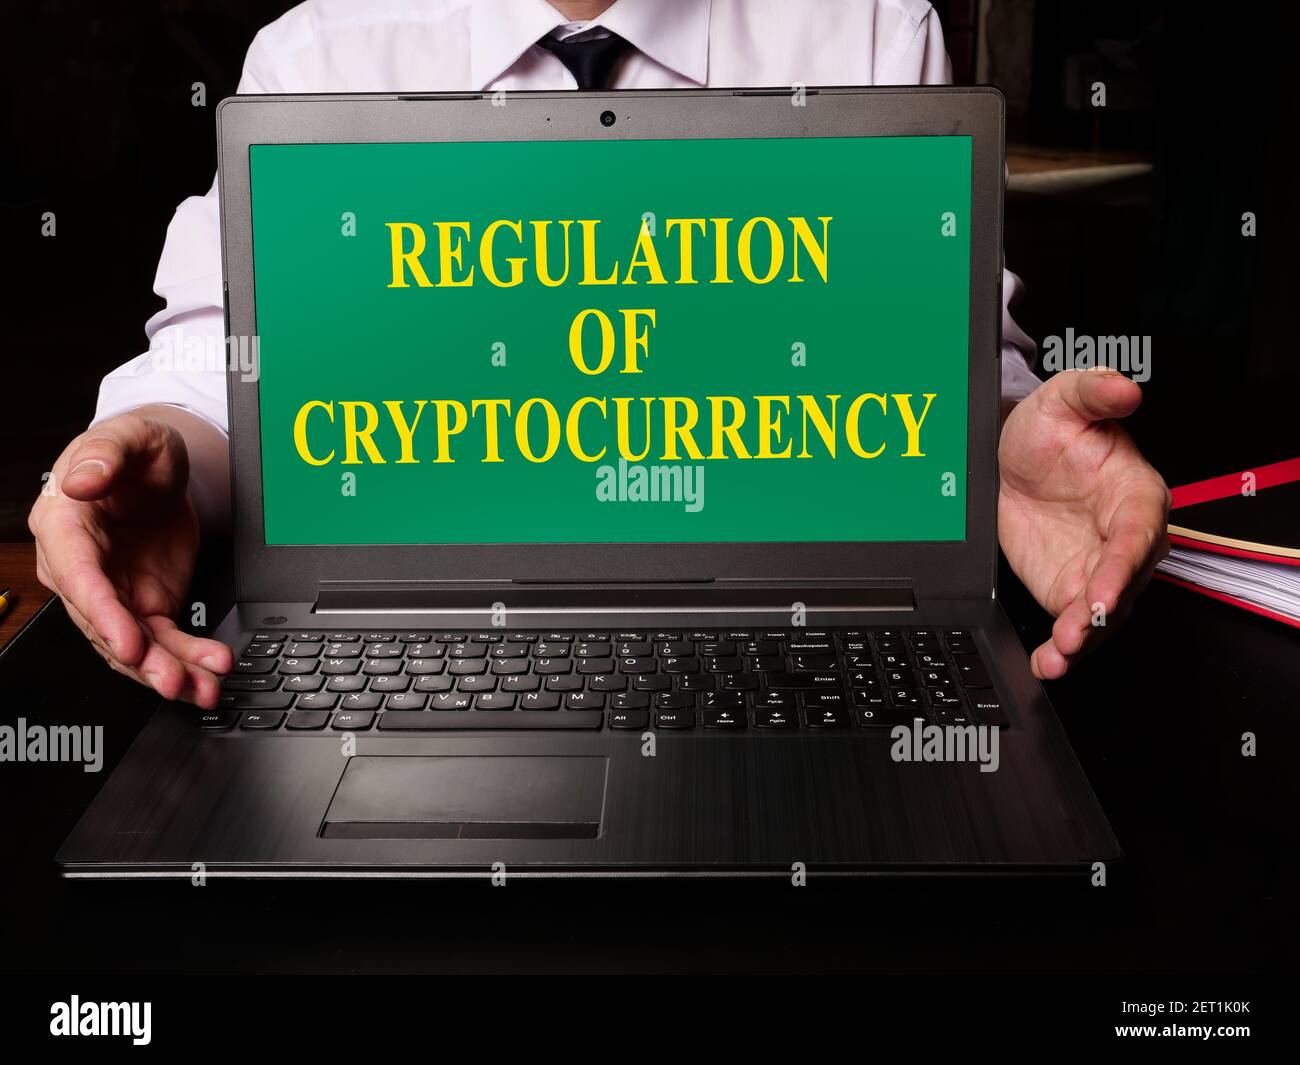 Regulation of Cryptocurrency law on the laptop. Stock Photo